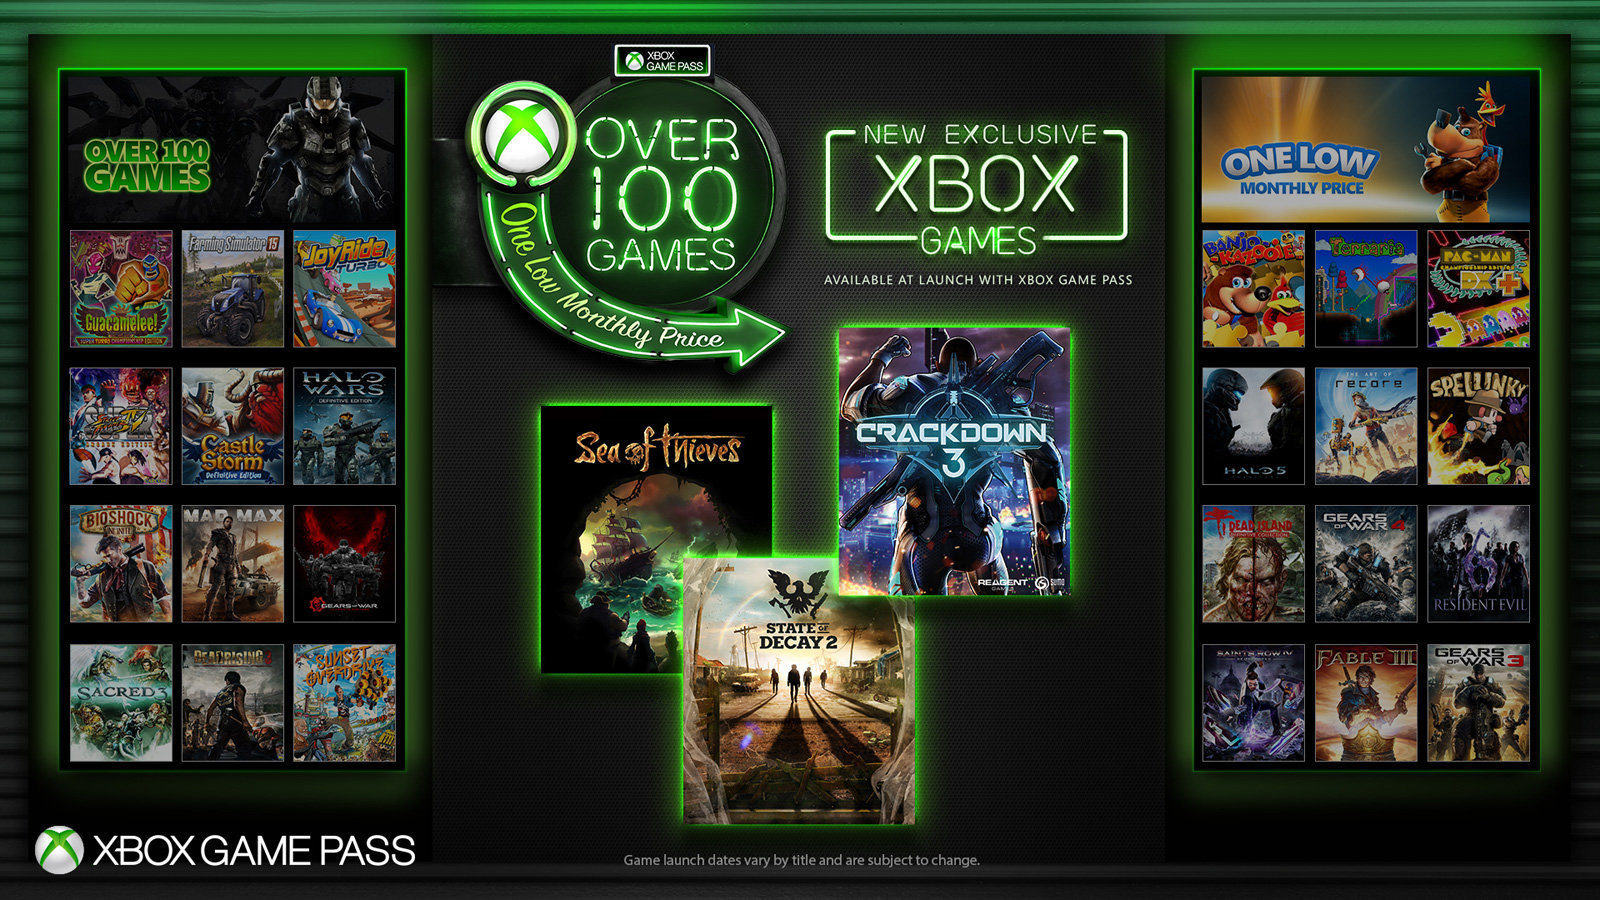 Xbox Game Pass for PC details